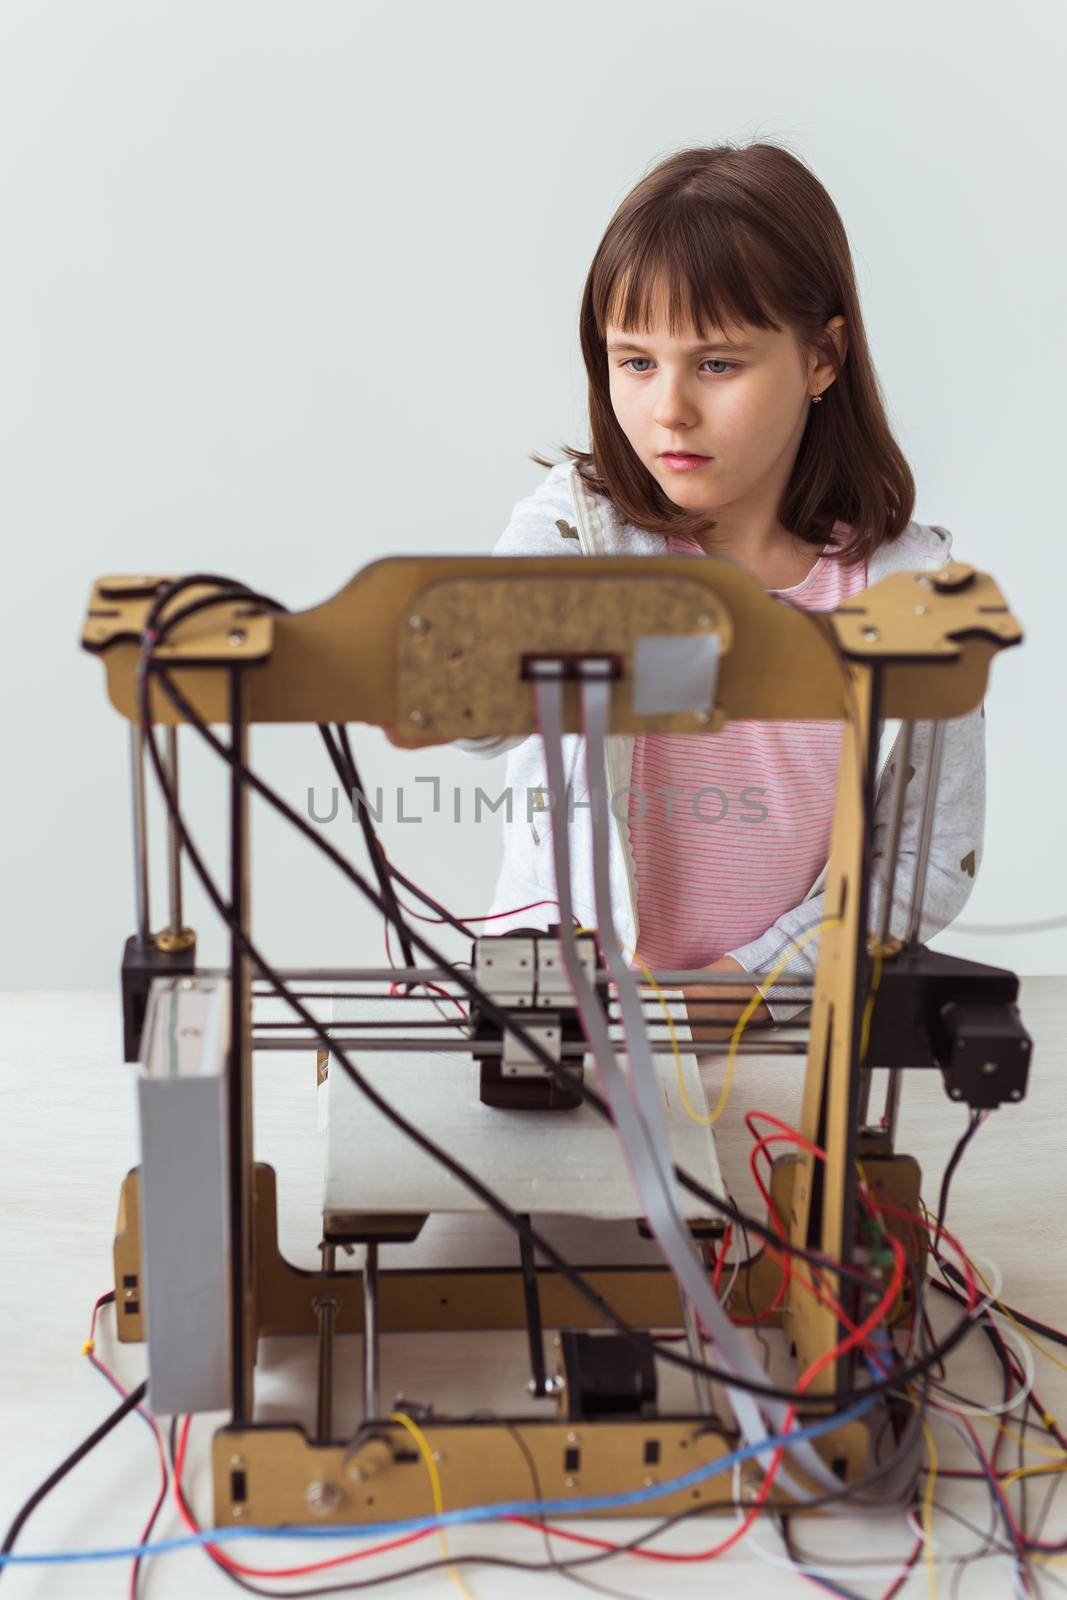 Little child architect using 3D Printer. Schoolgirl, technologies and study concept. by Satura86